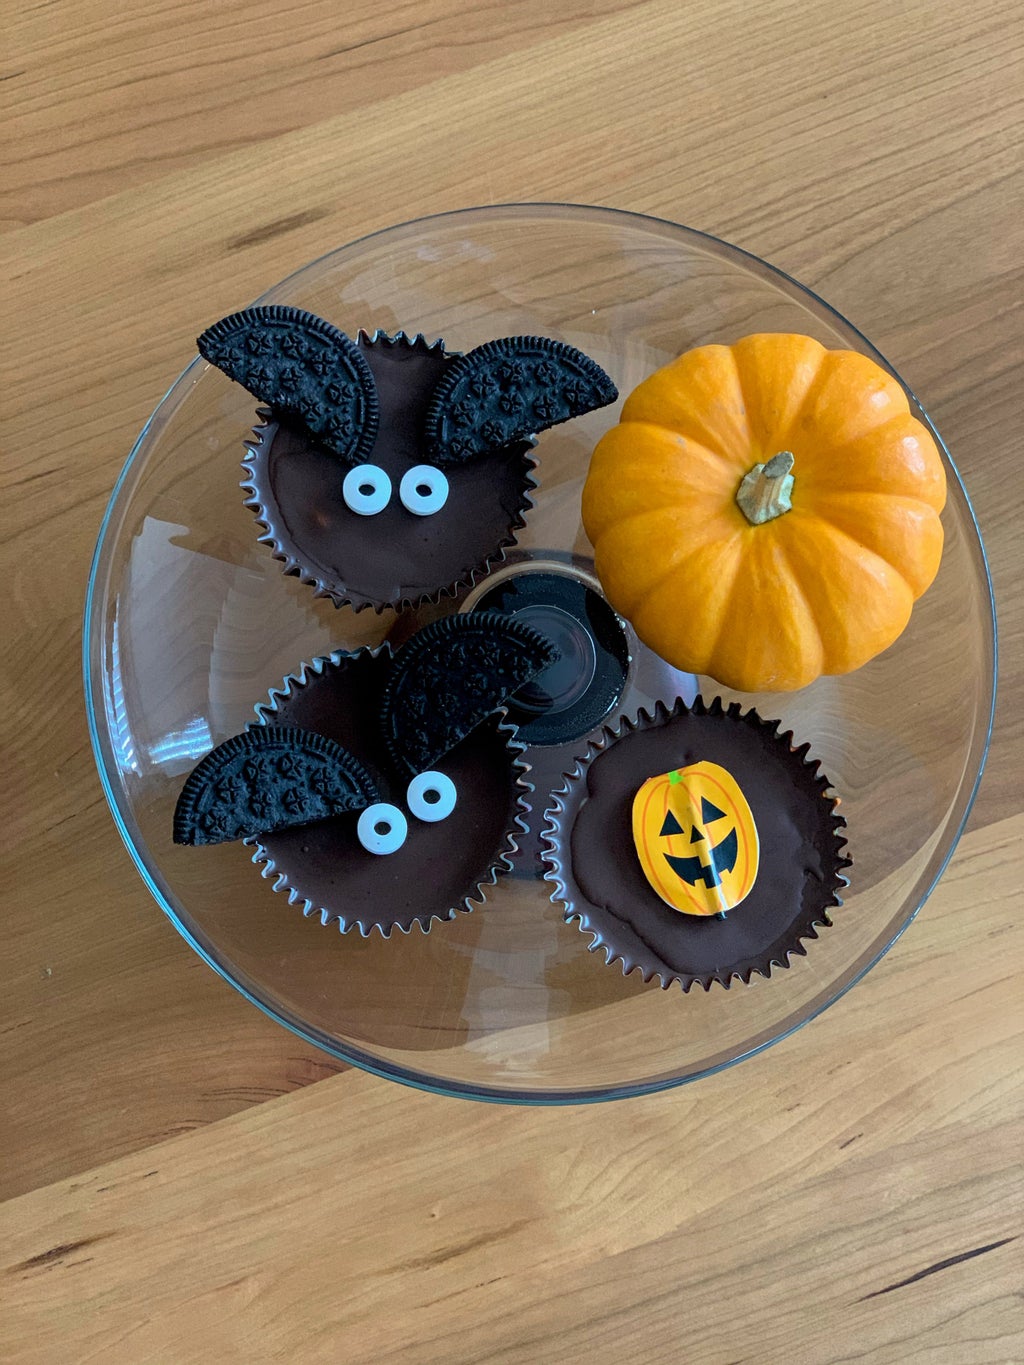 Halloween themed peanut butter cups and a pumpkin on a cake stand.